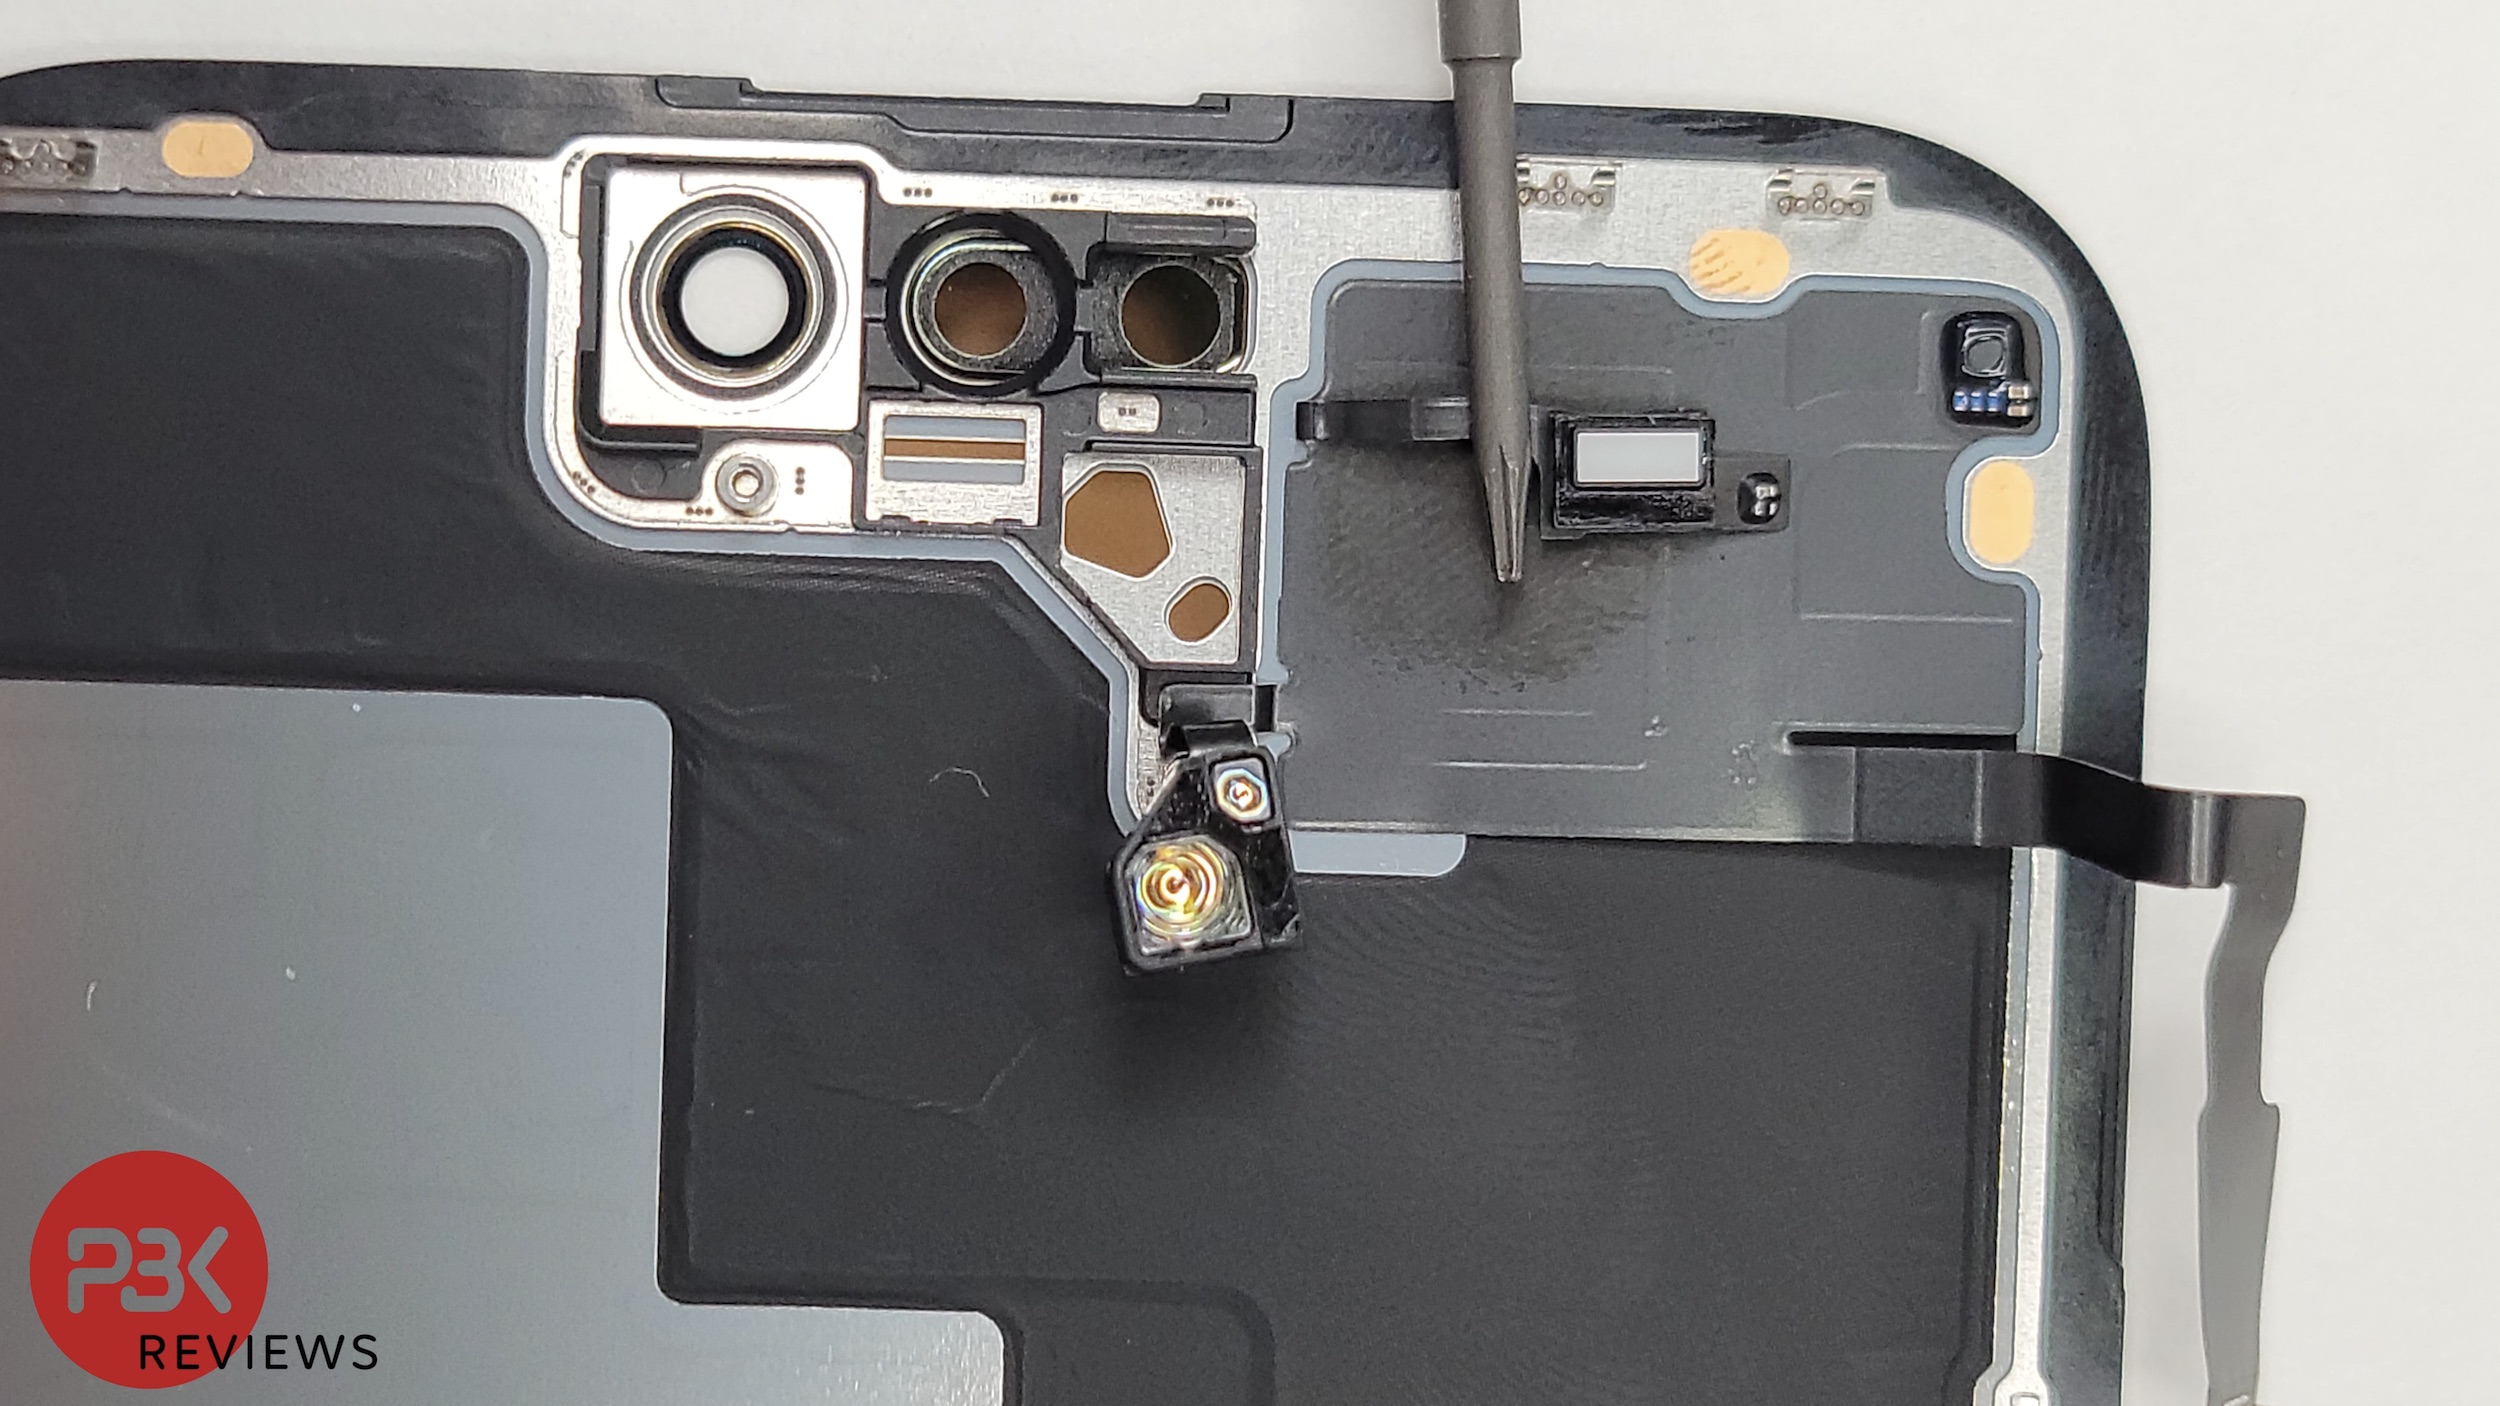 The initial teardown of the iPhone 14 Pro Max gives us our first look at the internal components of the phone.